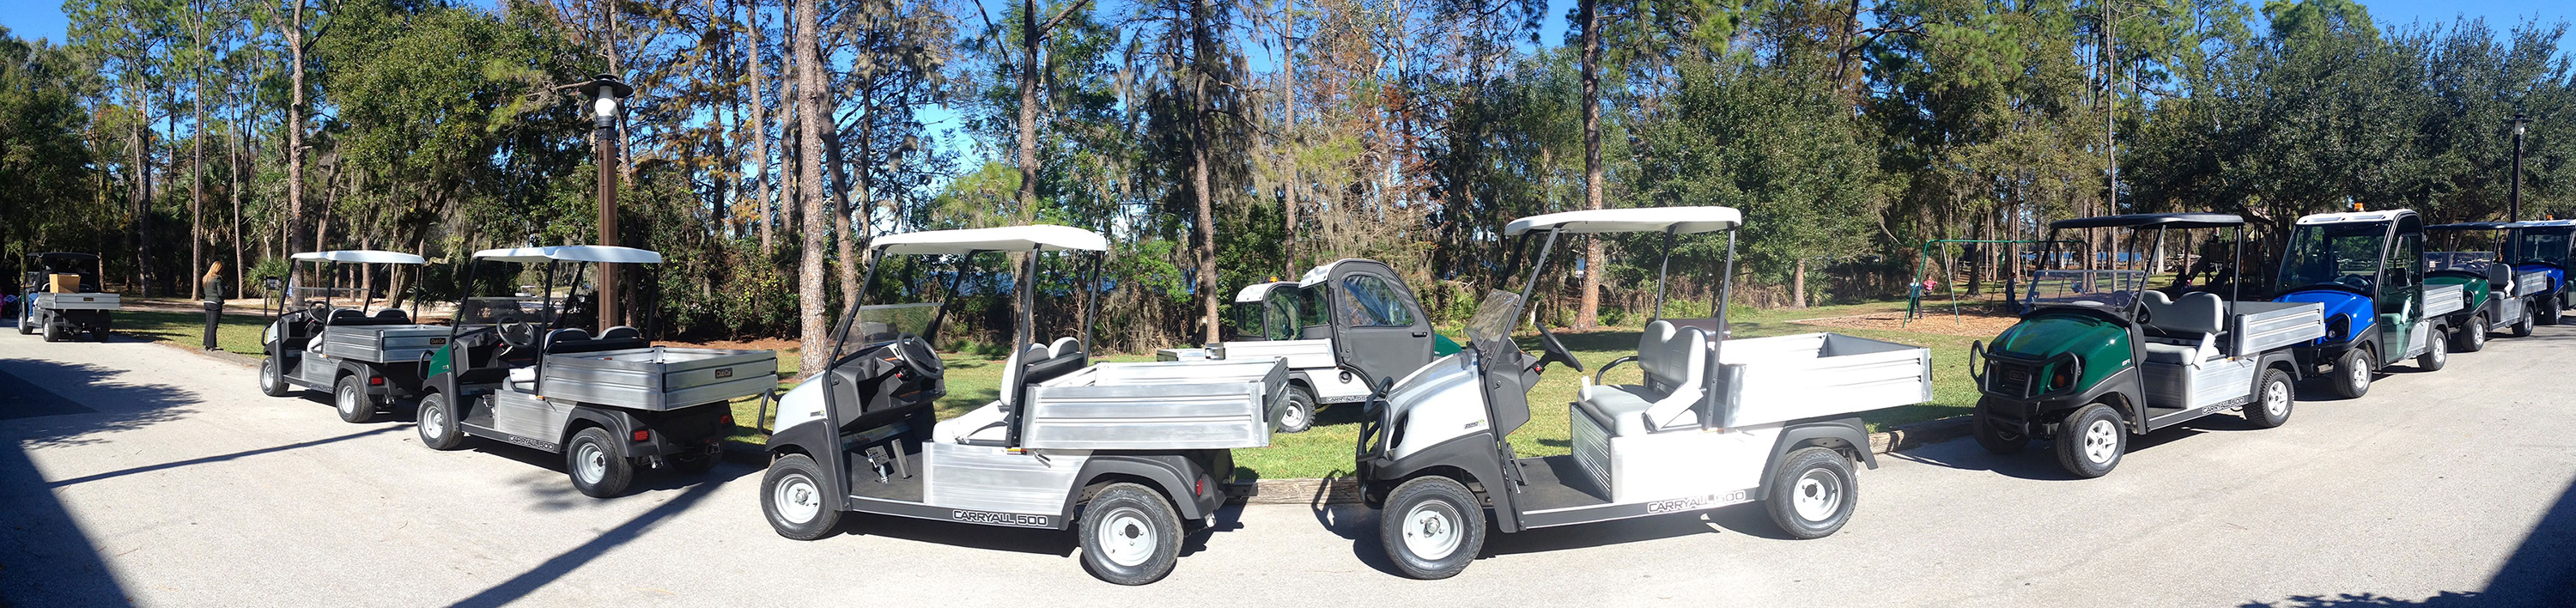 The new line of Carryall Utility Vehicles shown at the media event includes compact, full and heavy-duty models used in  commercial and industrial applications.